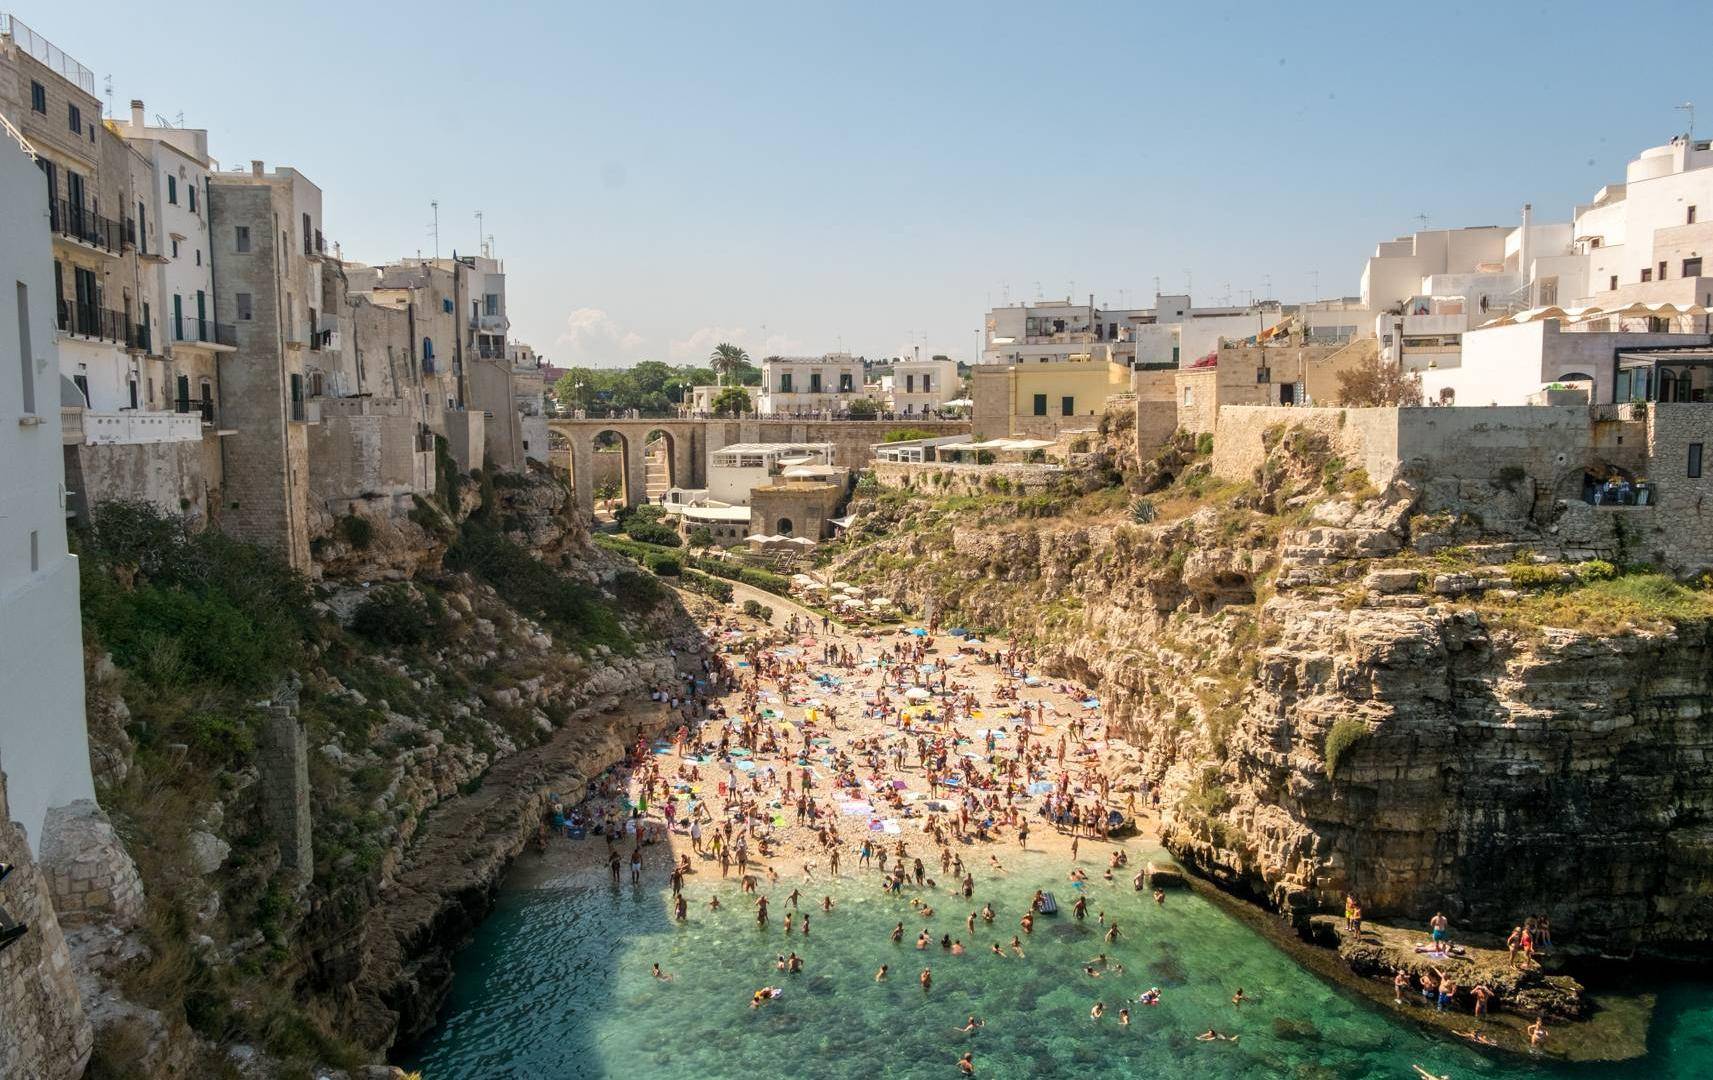 Why visit Puglia? We can think of at least 15 reasons…